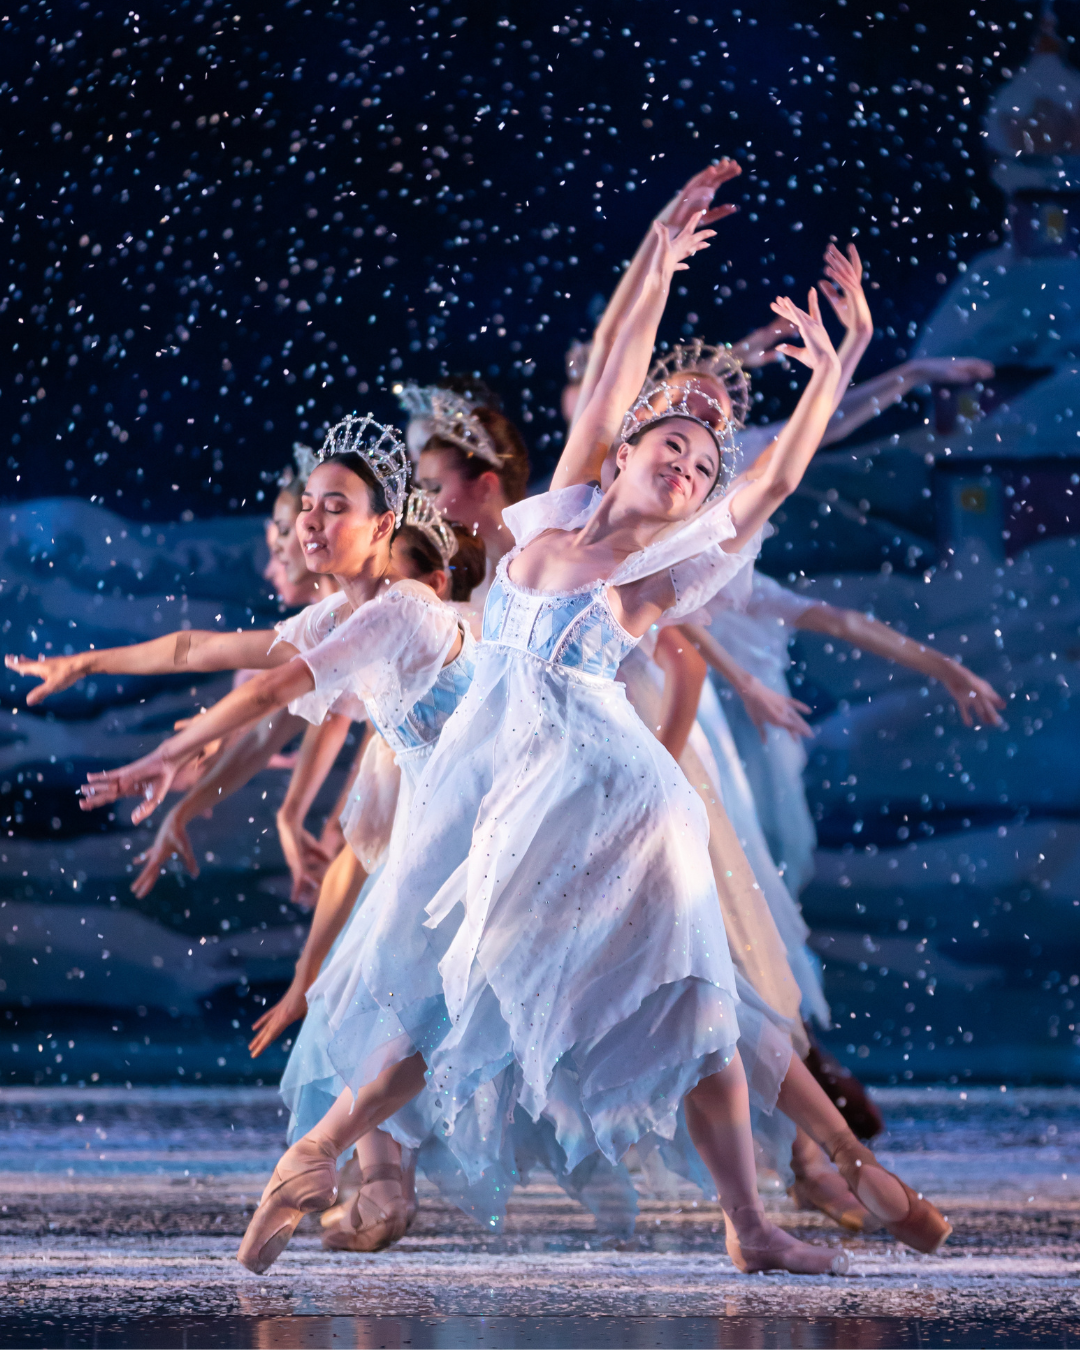 Phoebe Ing as Snow is Gerard Charles' BalletMet's yearly production The Nutcracker